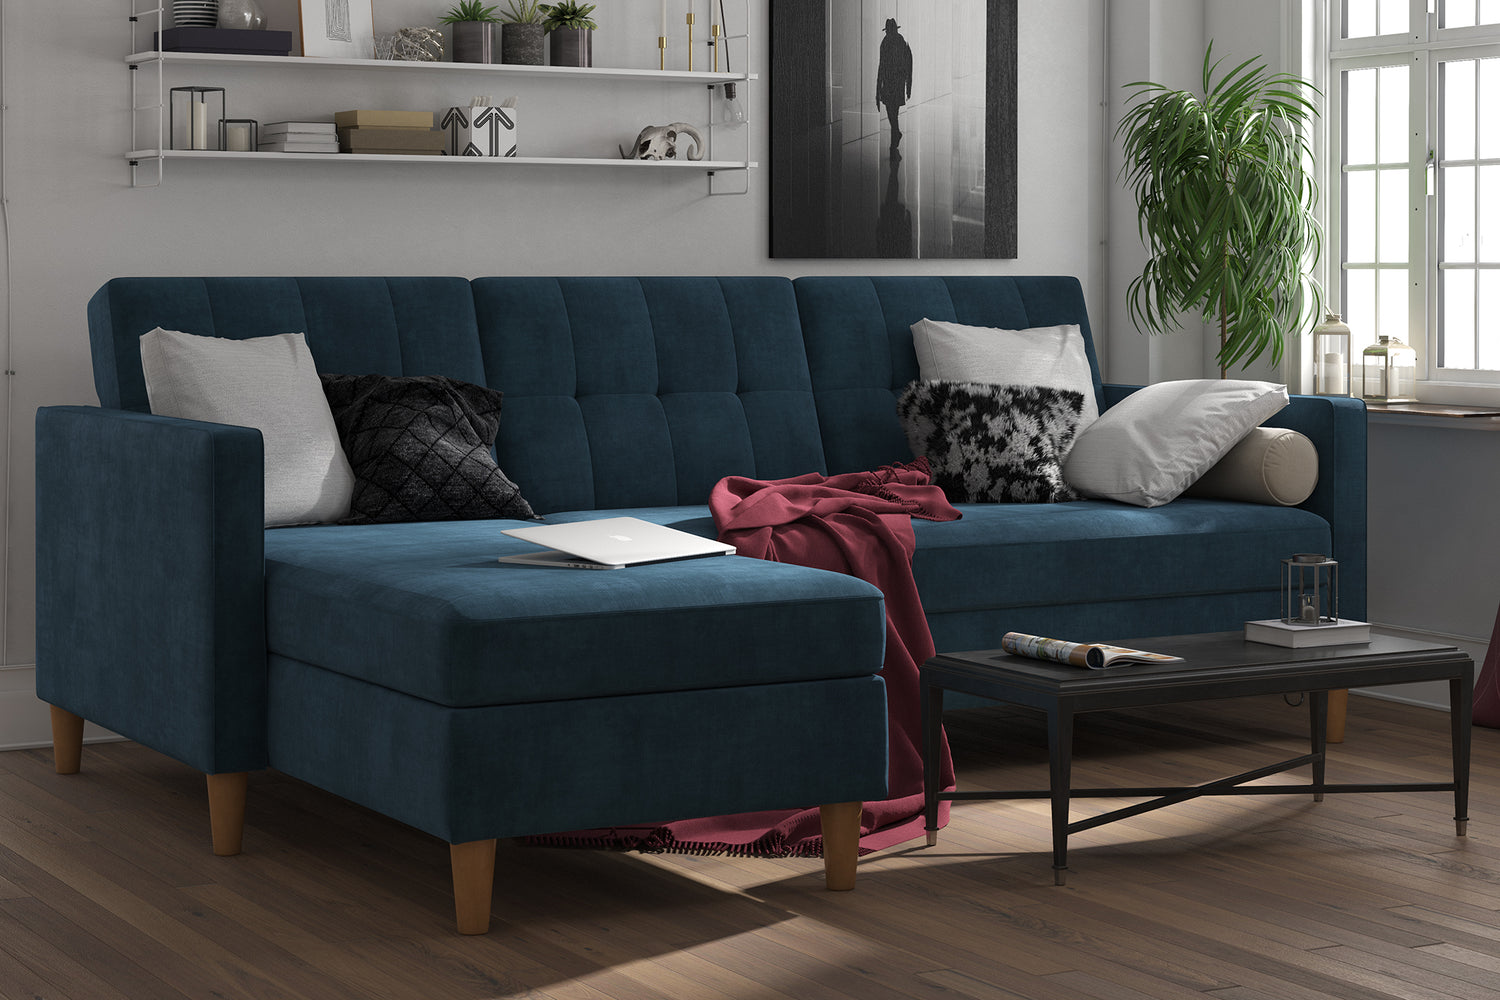 Dorel Home Hartford Storage Sectional Sofa Bed with Storage Chaise Blue-Better Bed Company 